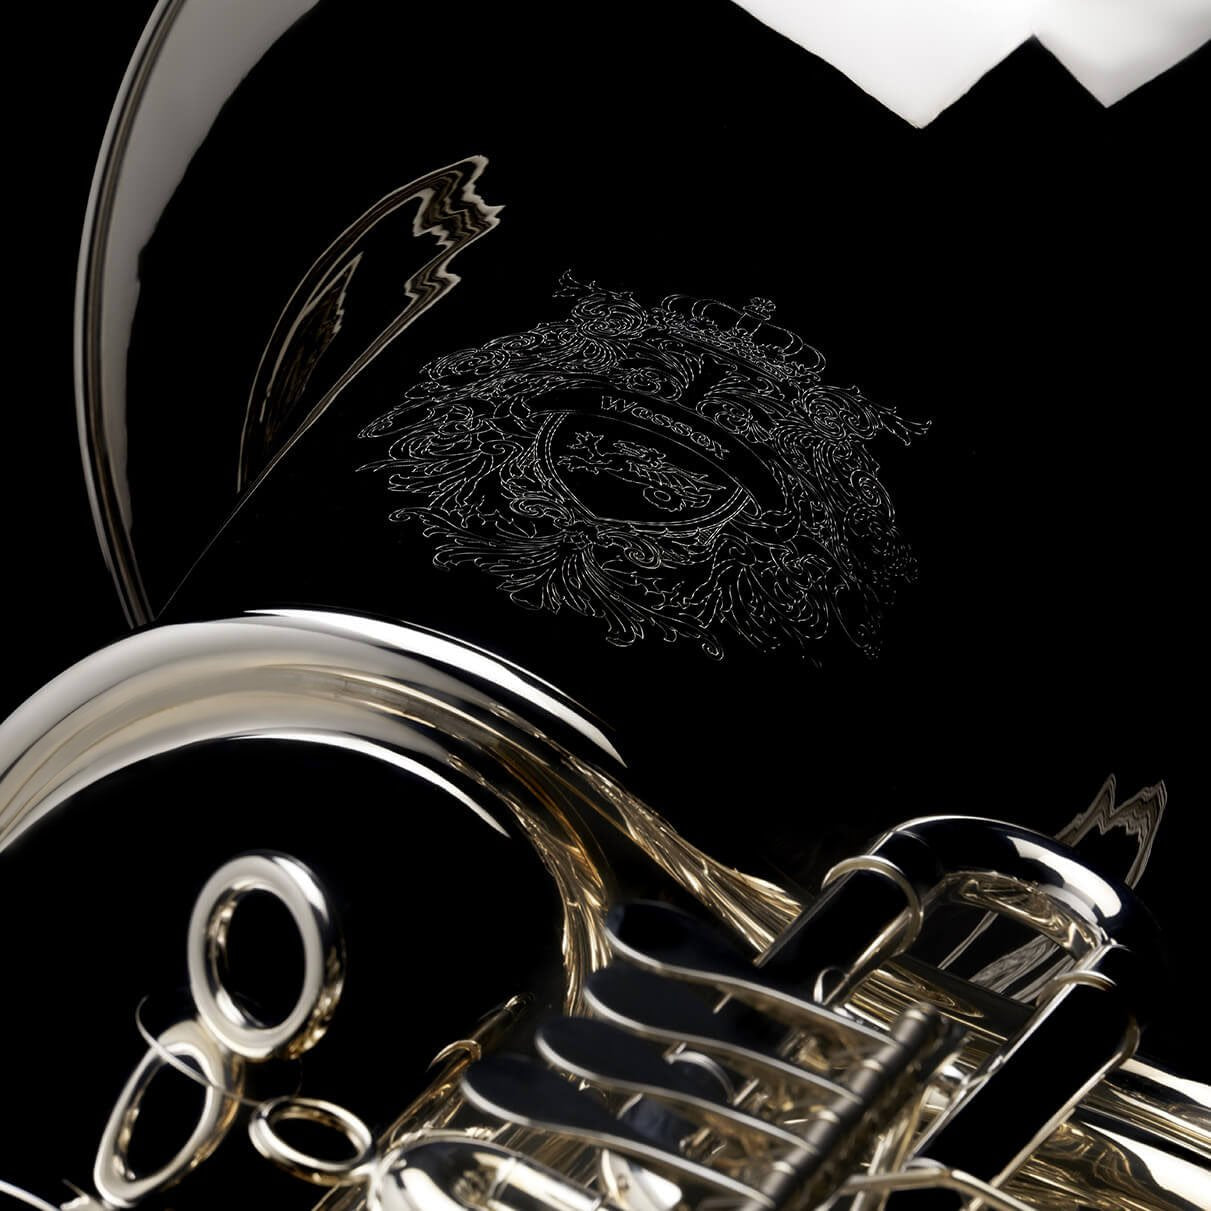 An image detailing the hand-engraving on a BBb 6/4 Rotary tuba ‘Kaiser’  from Wessex Tubas